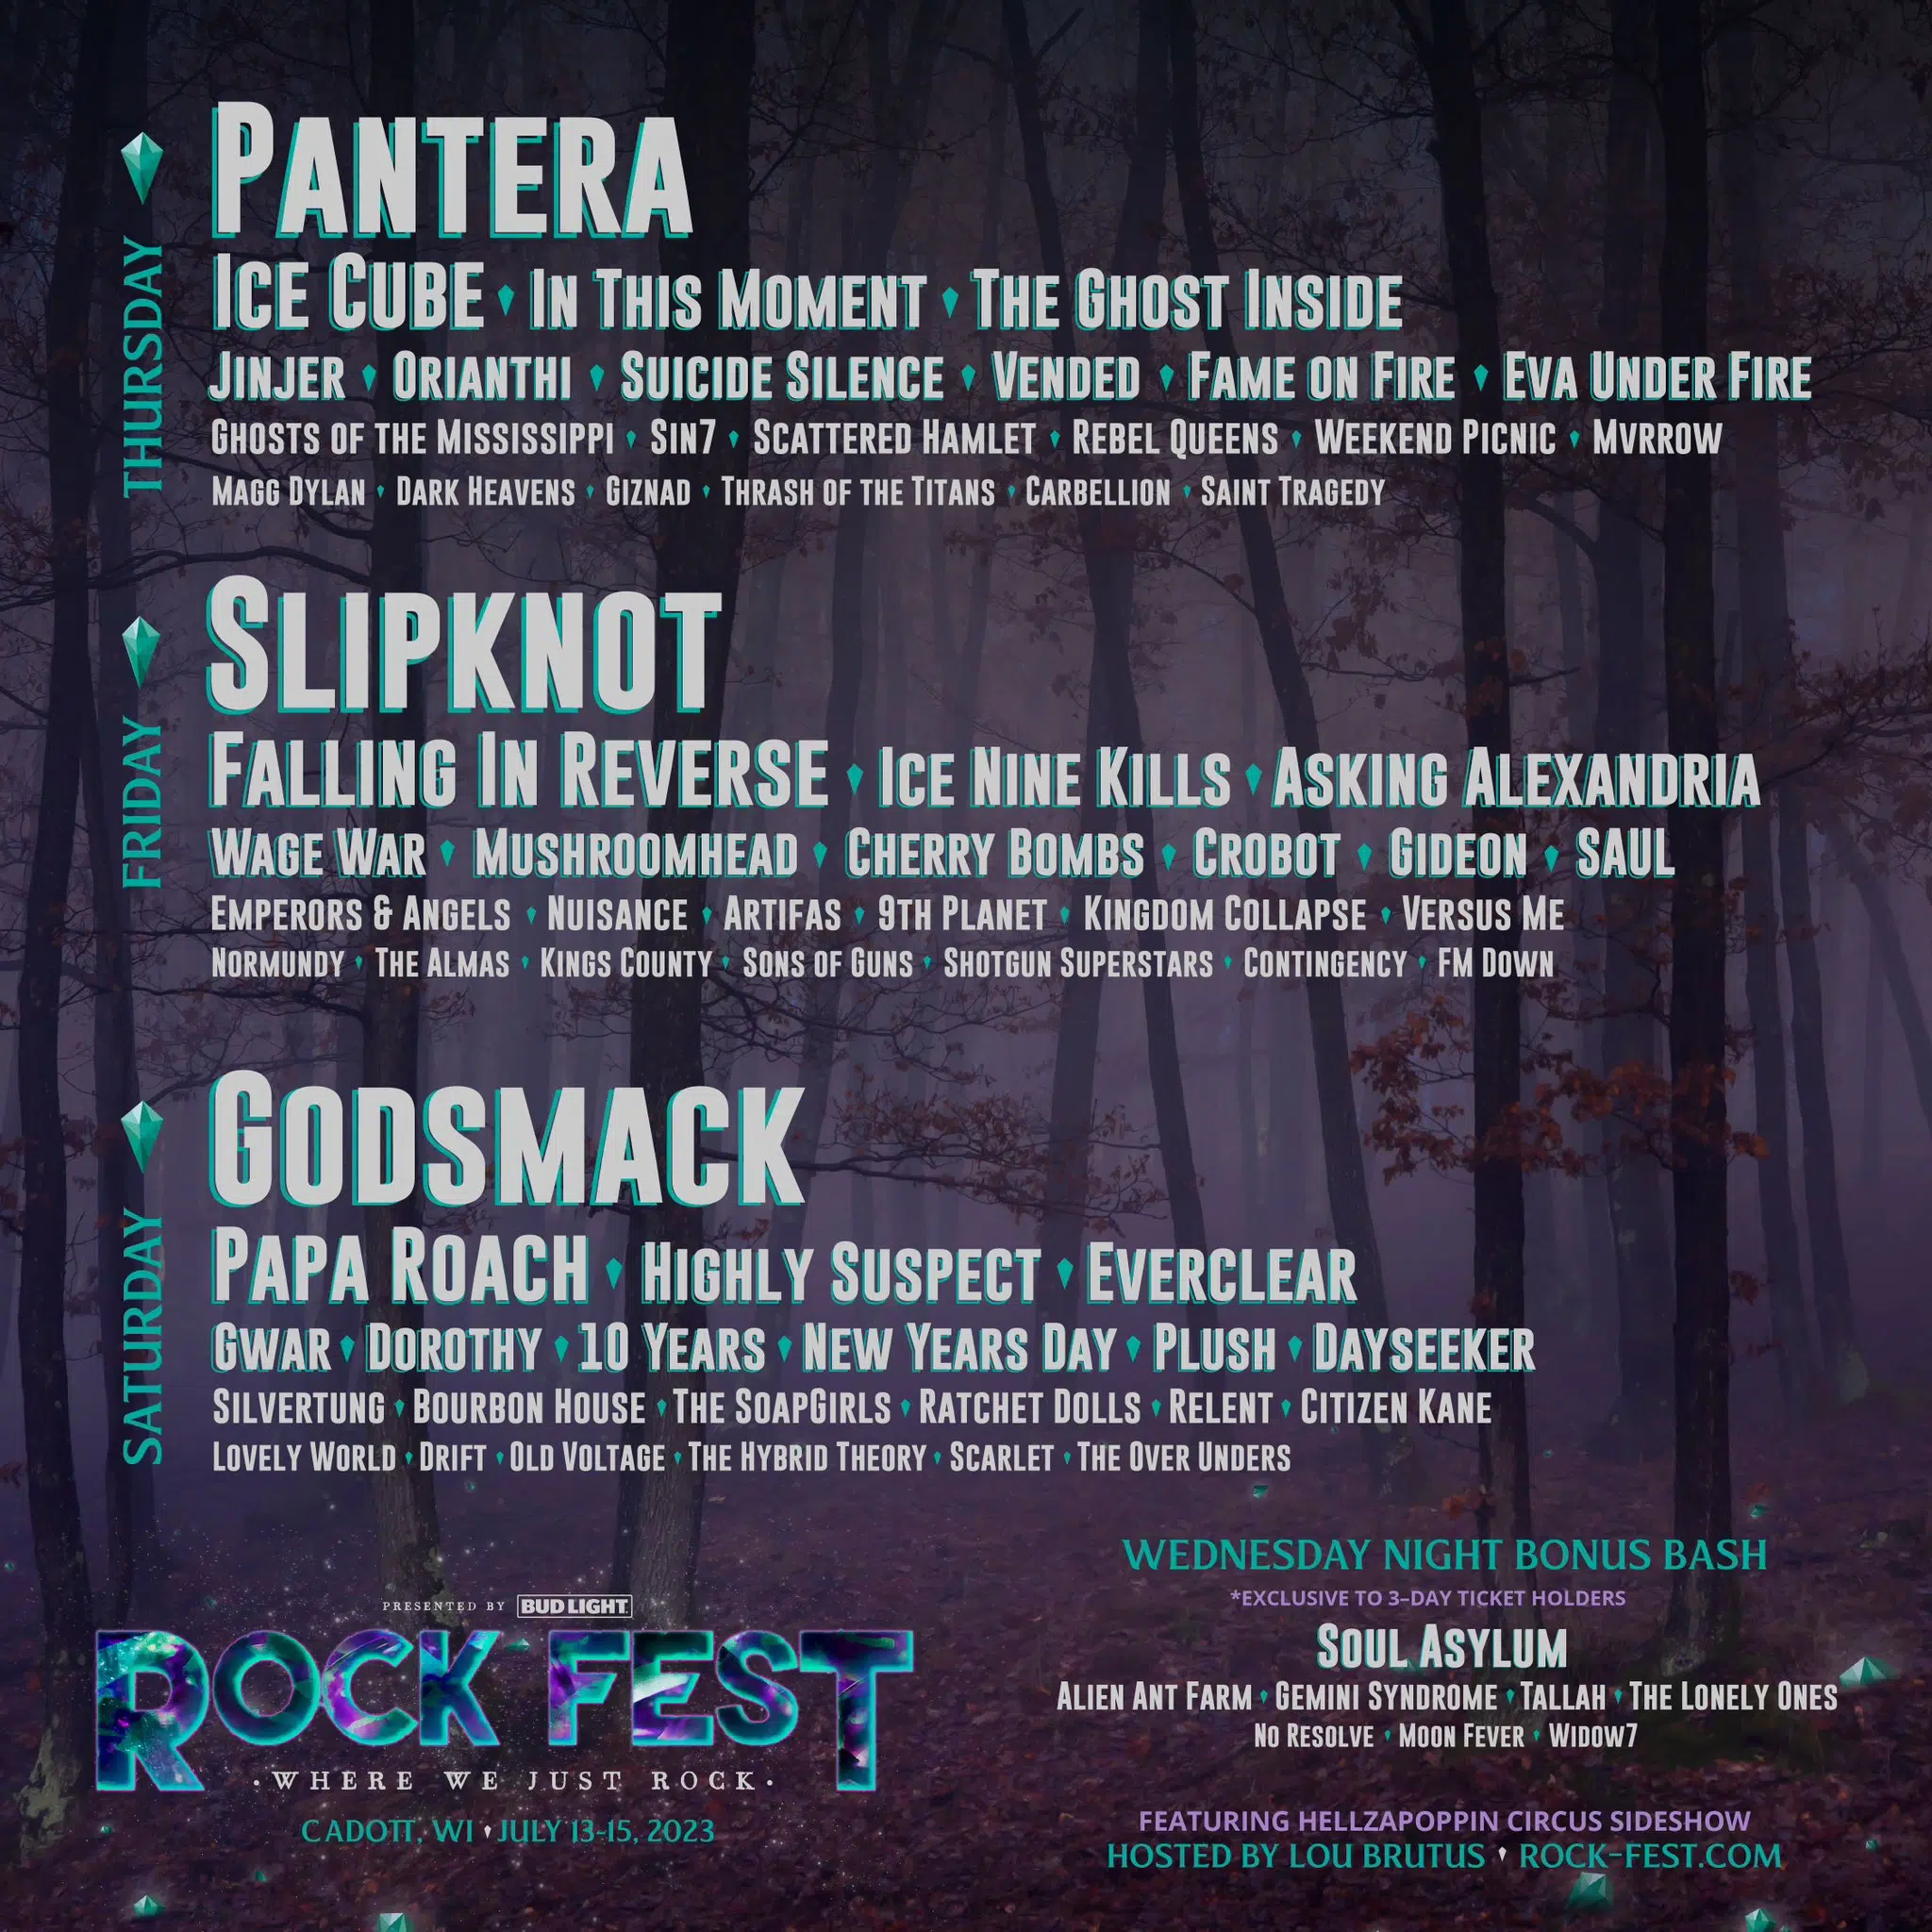 WILL WE SEE YOU IN CADOTT?  ROCKFEST RETURNS!